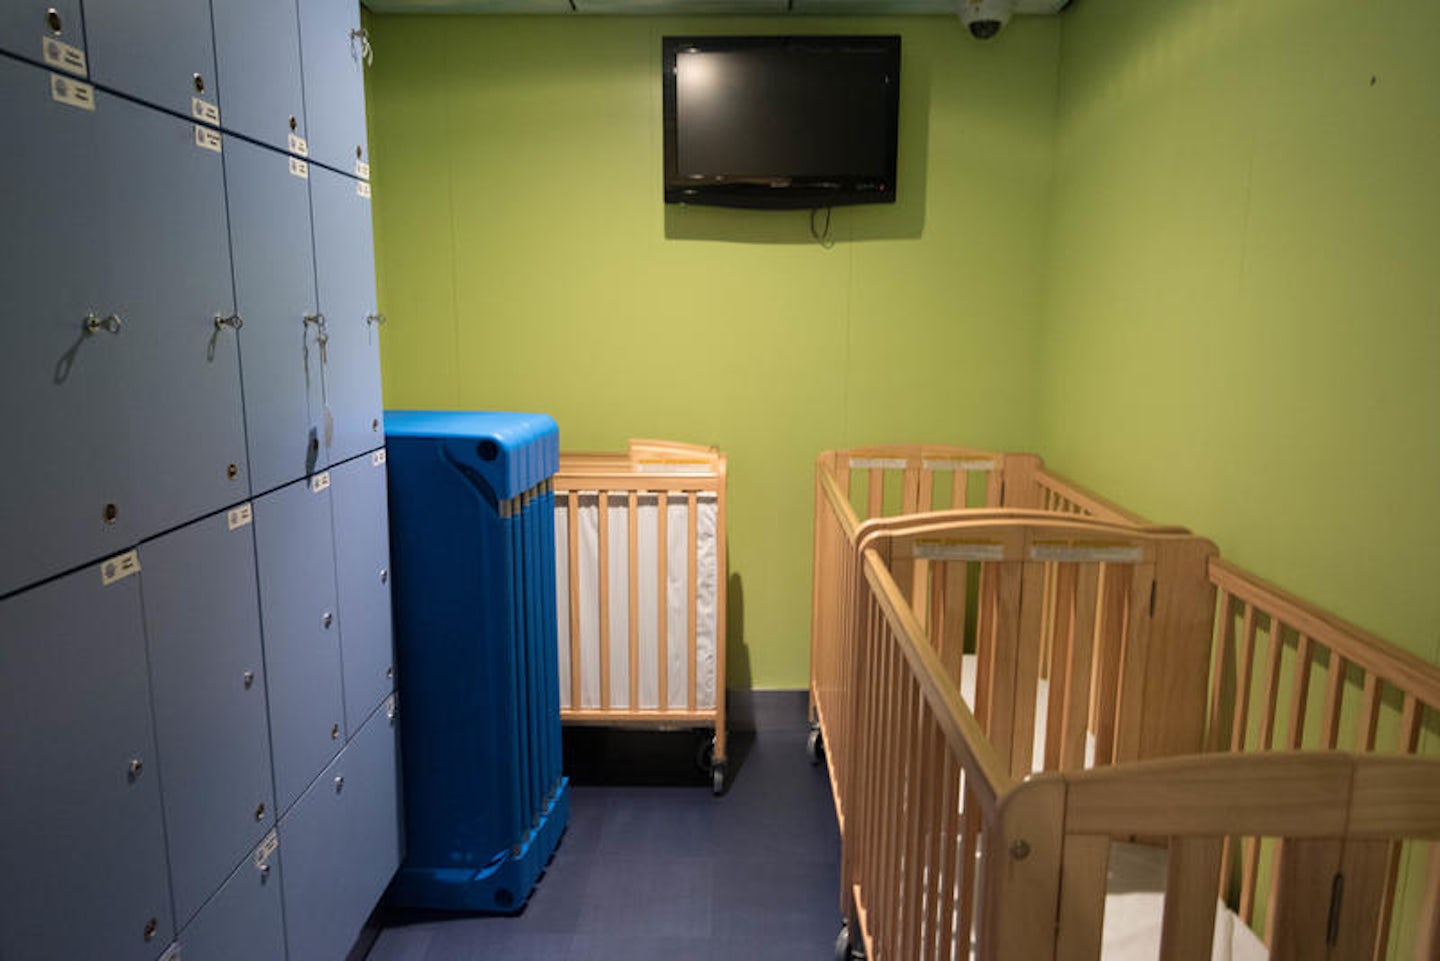 Royal Babies and Tots Nursery on Freedom of the Seas